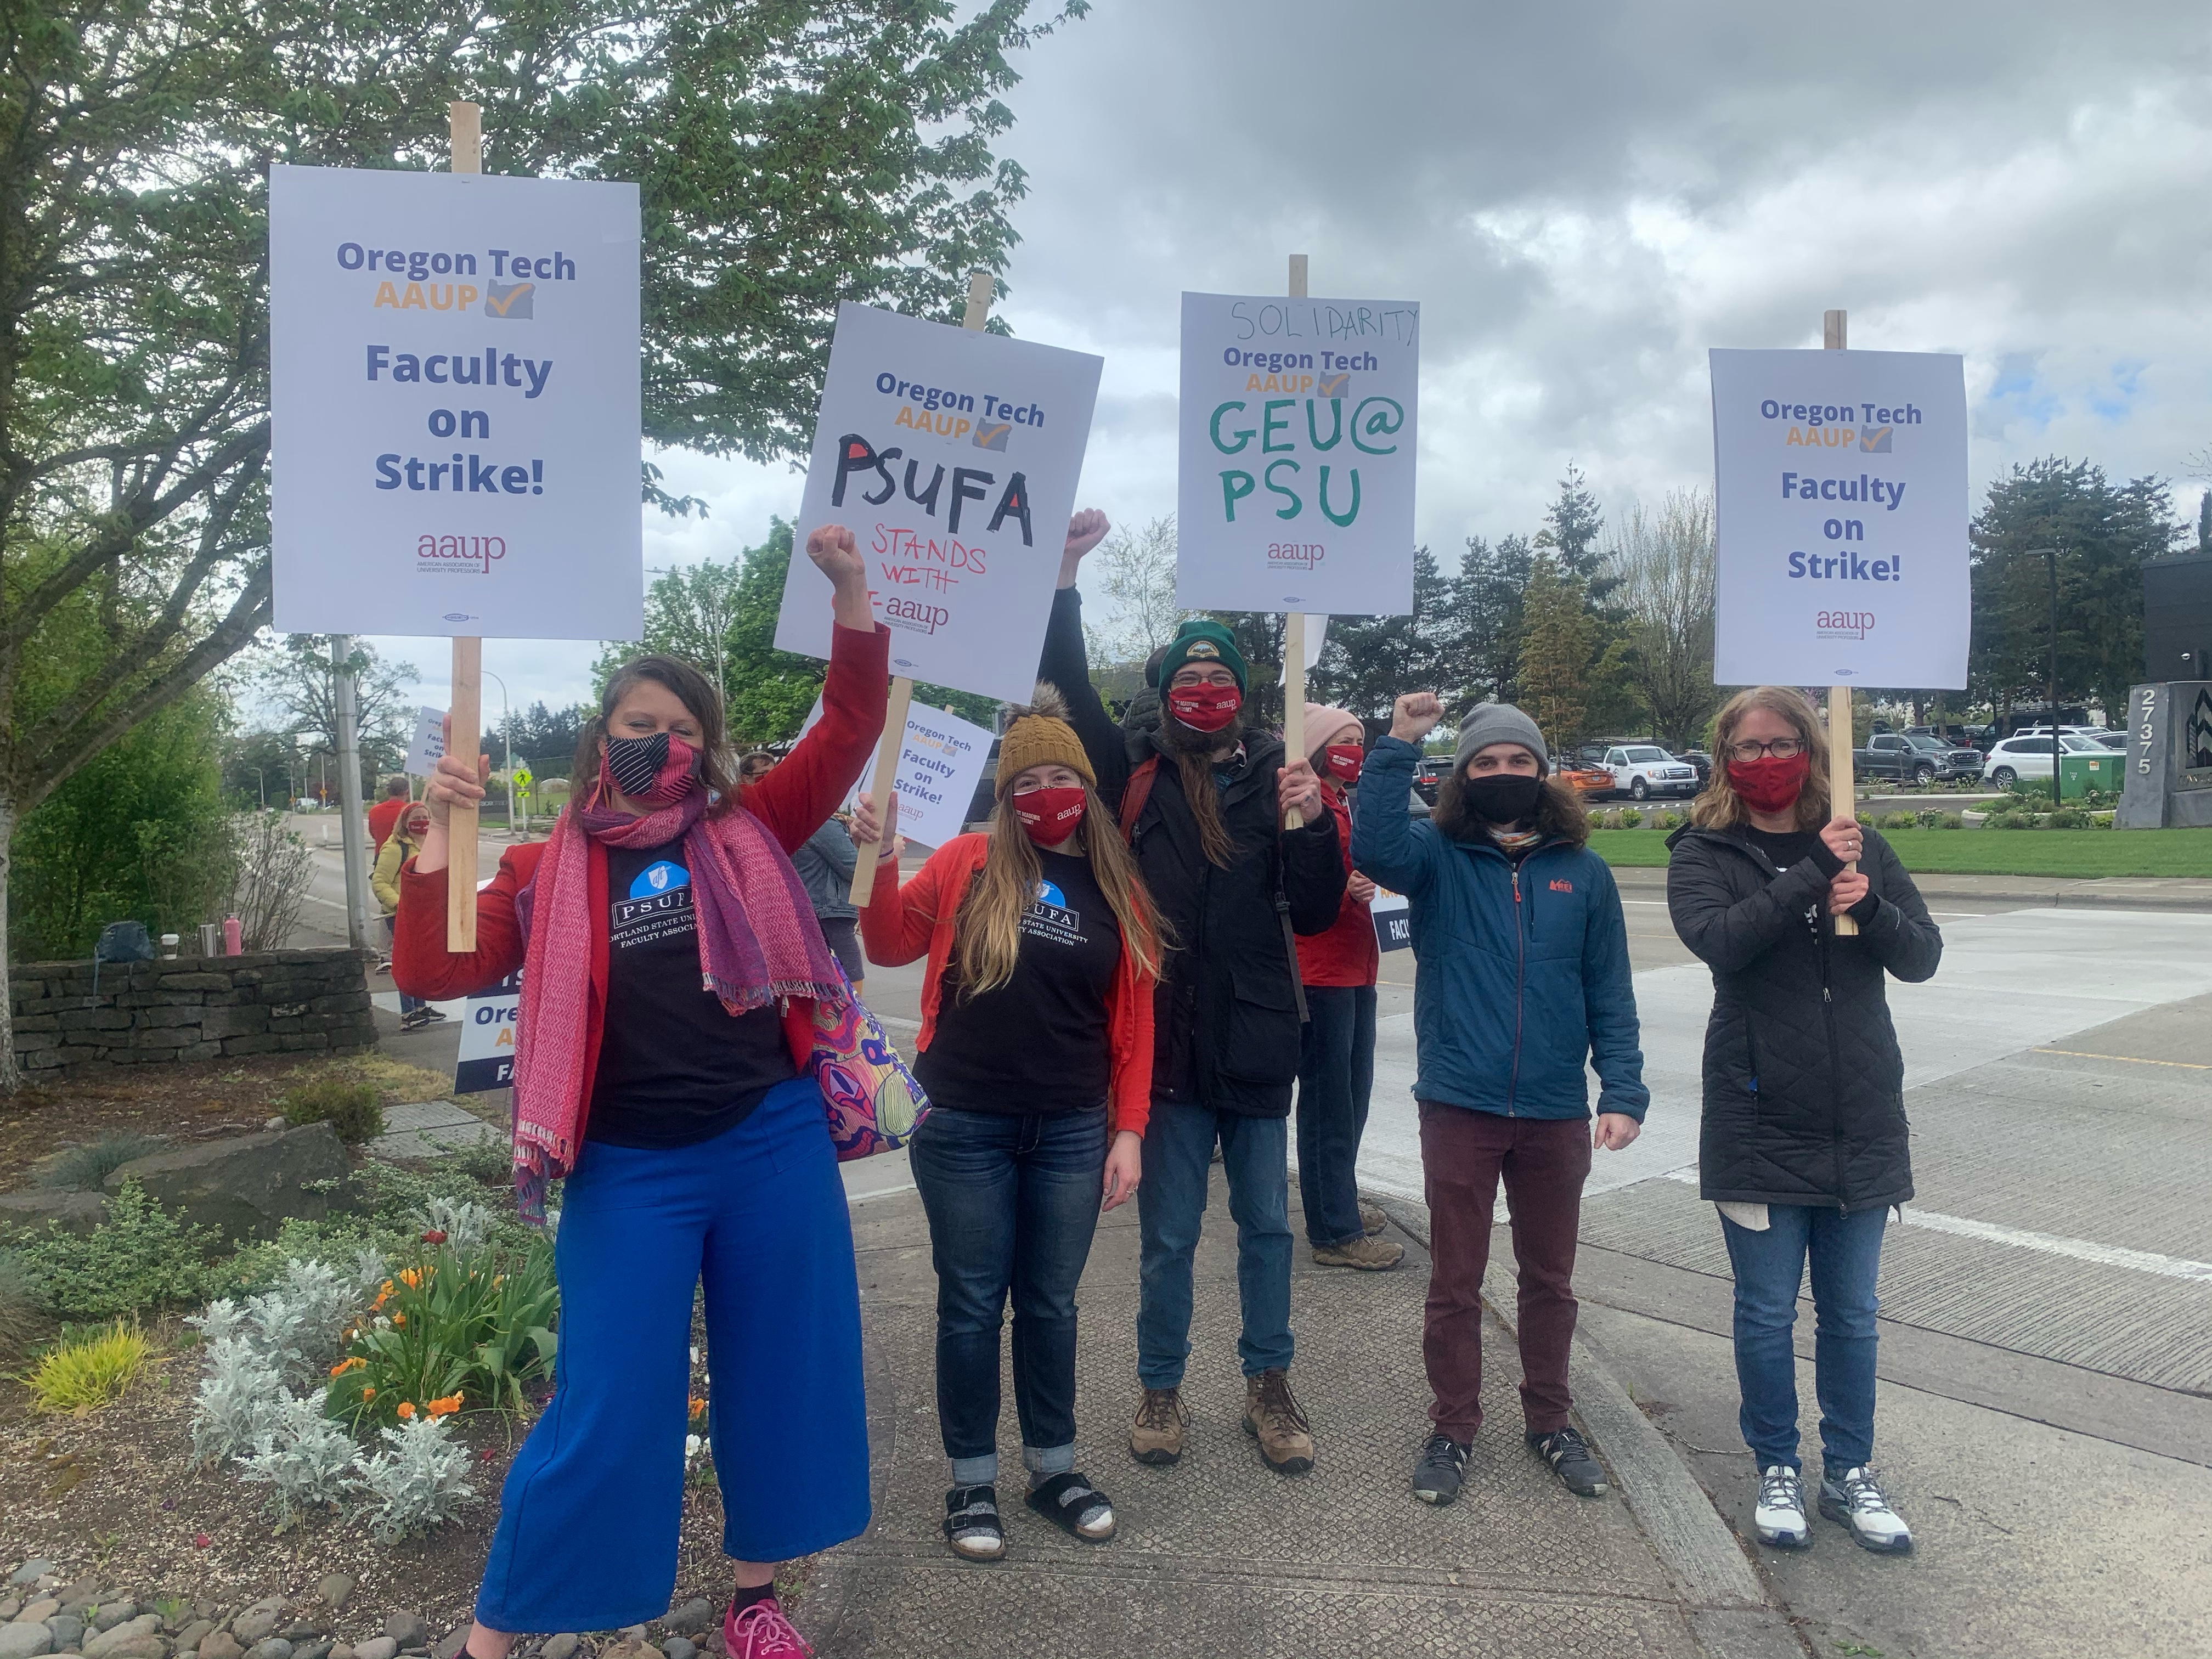 OT-AAUP on Strike: Show Solidarity